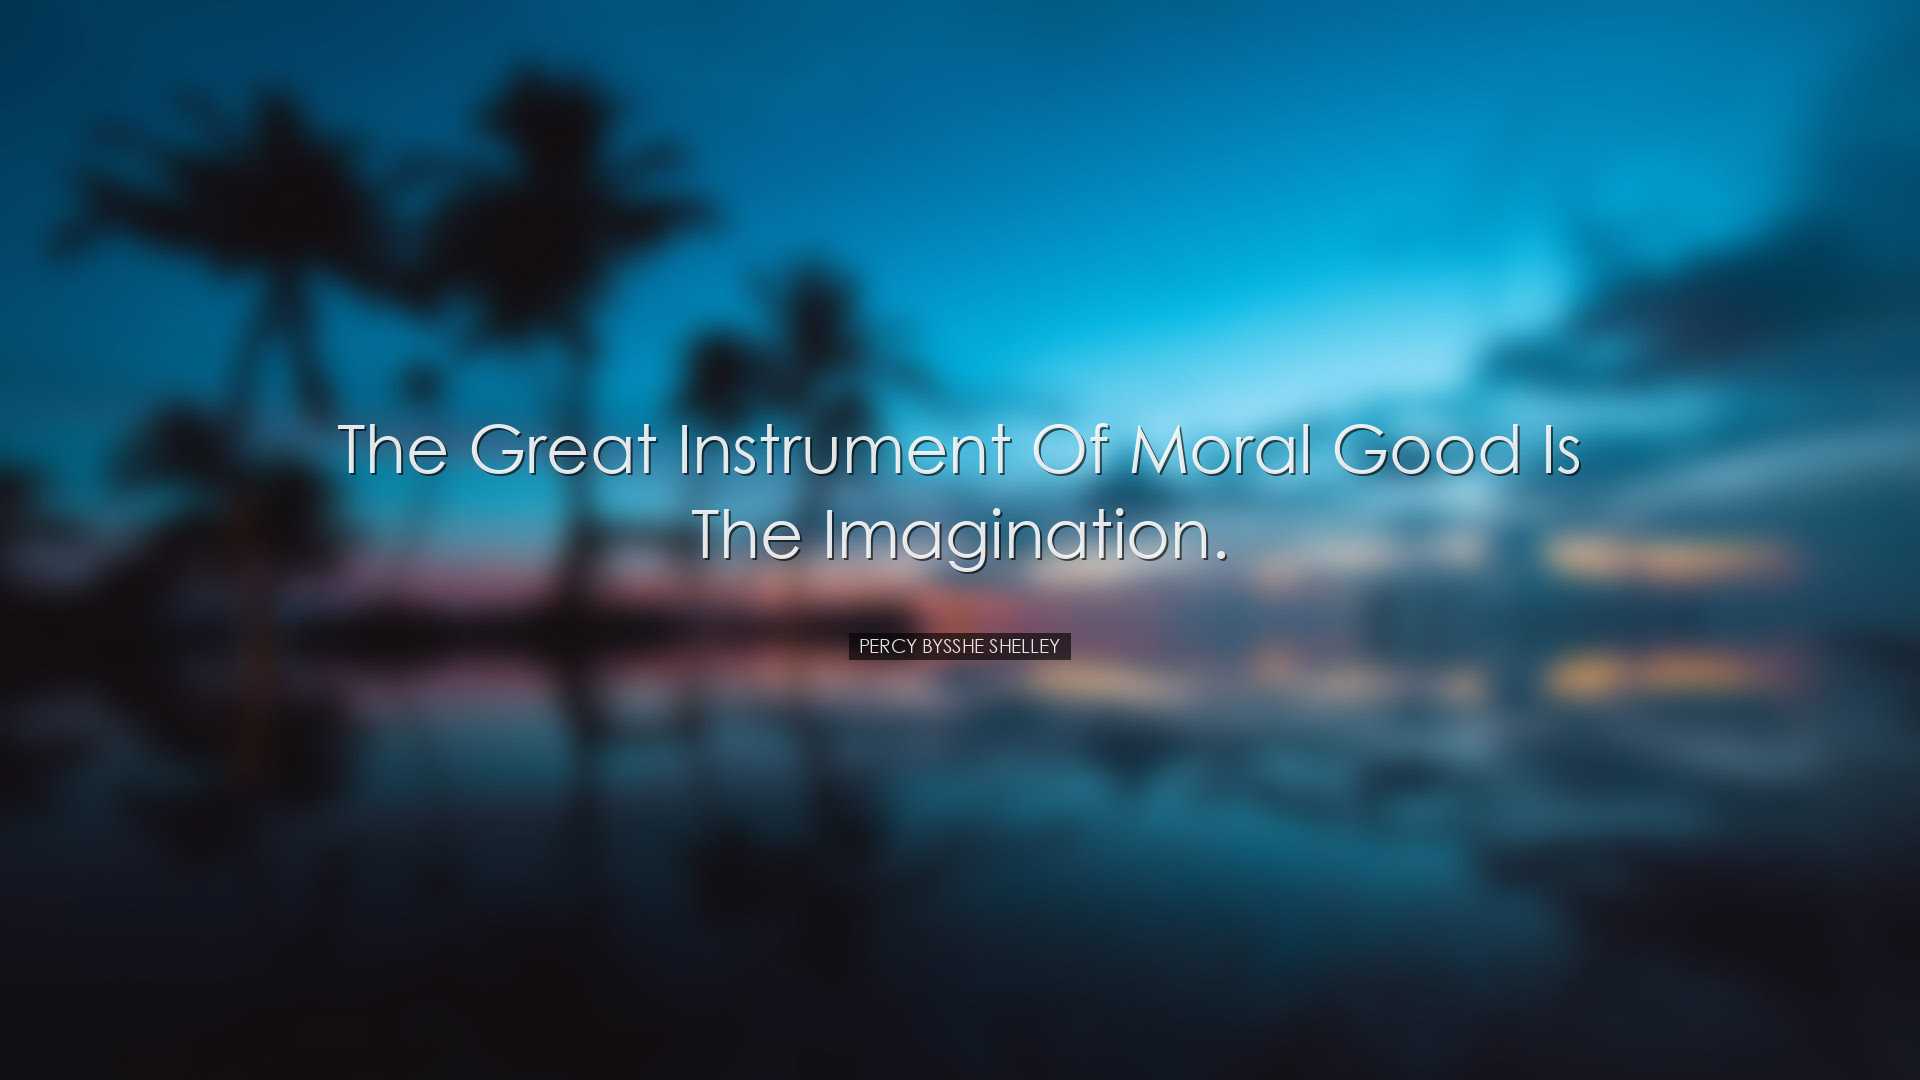 The great instrument of moral good is the imagination. - Percy Bys